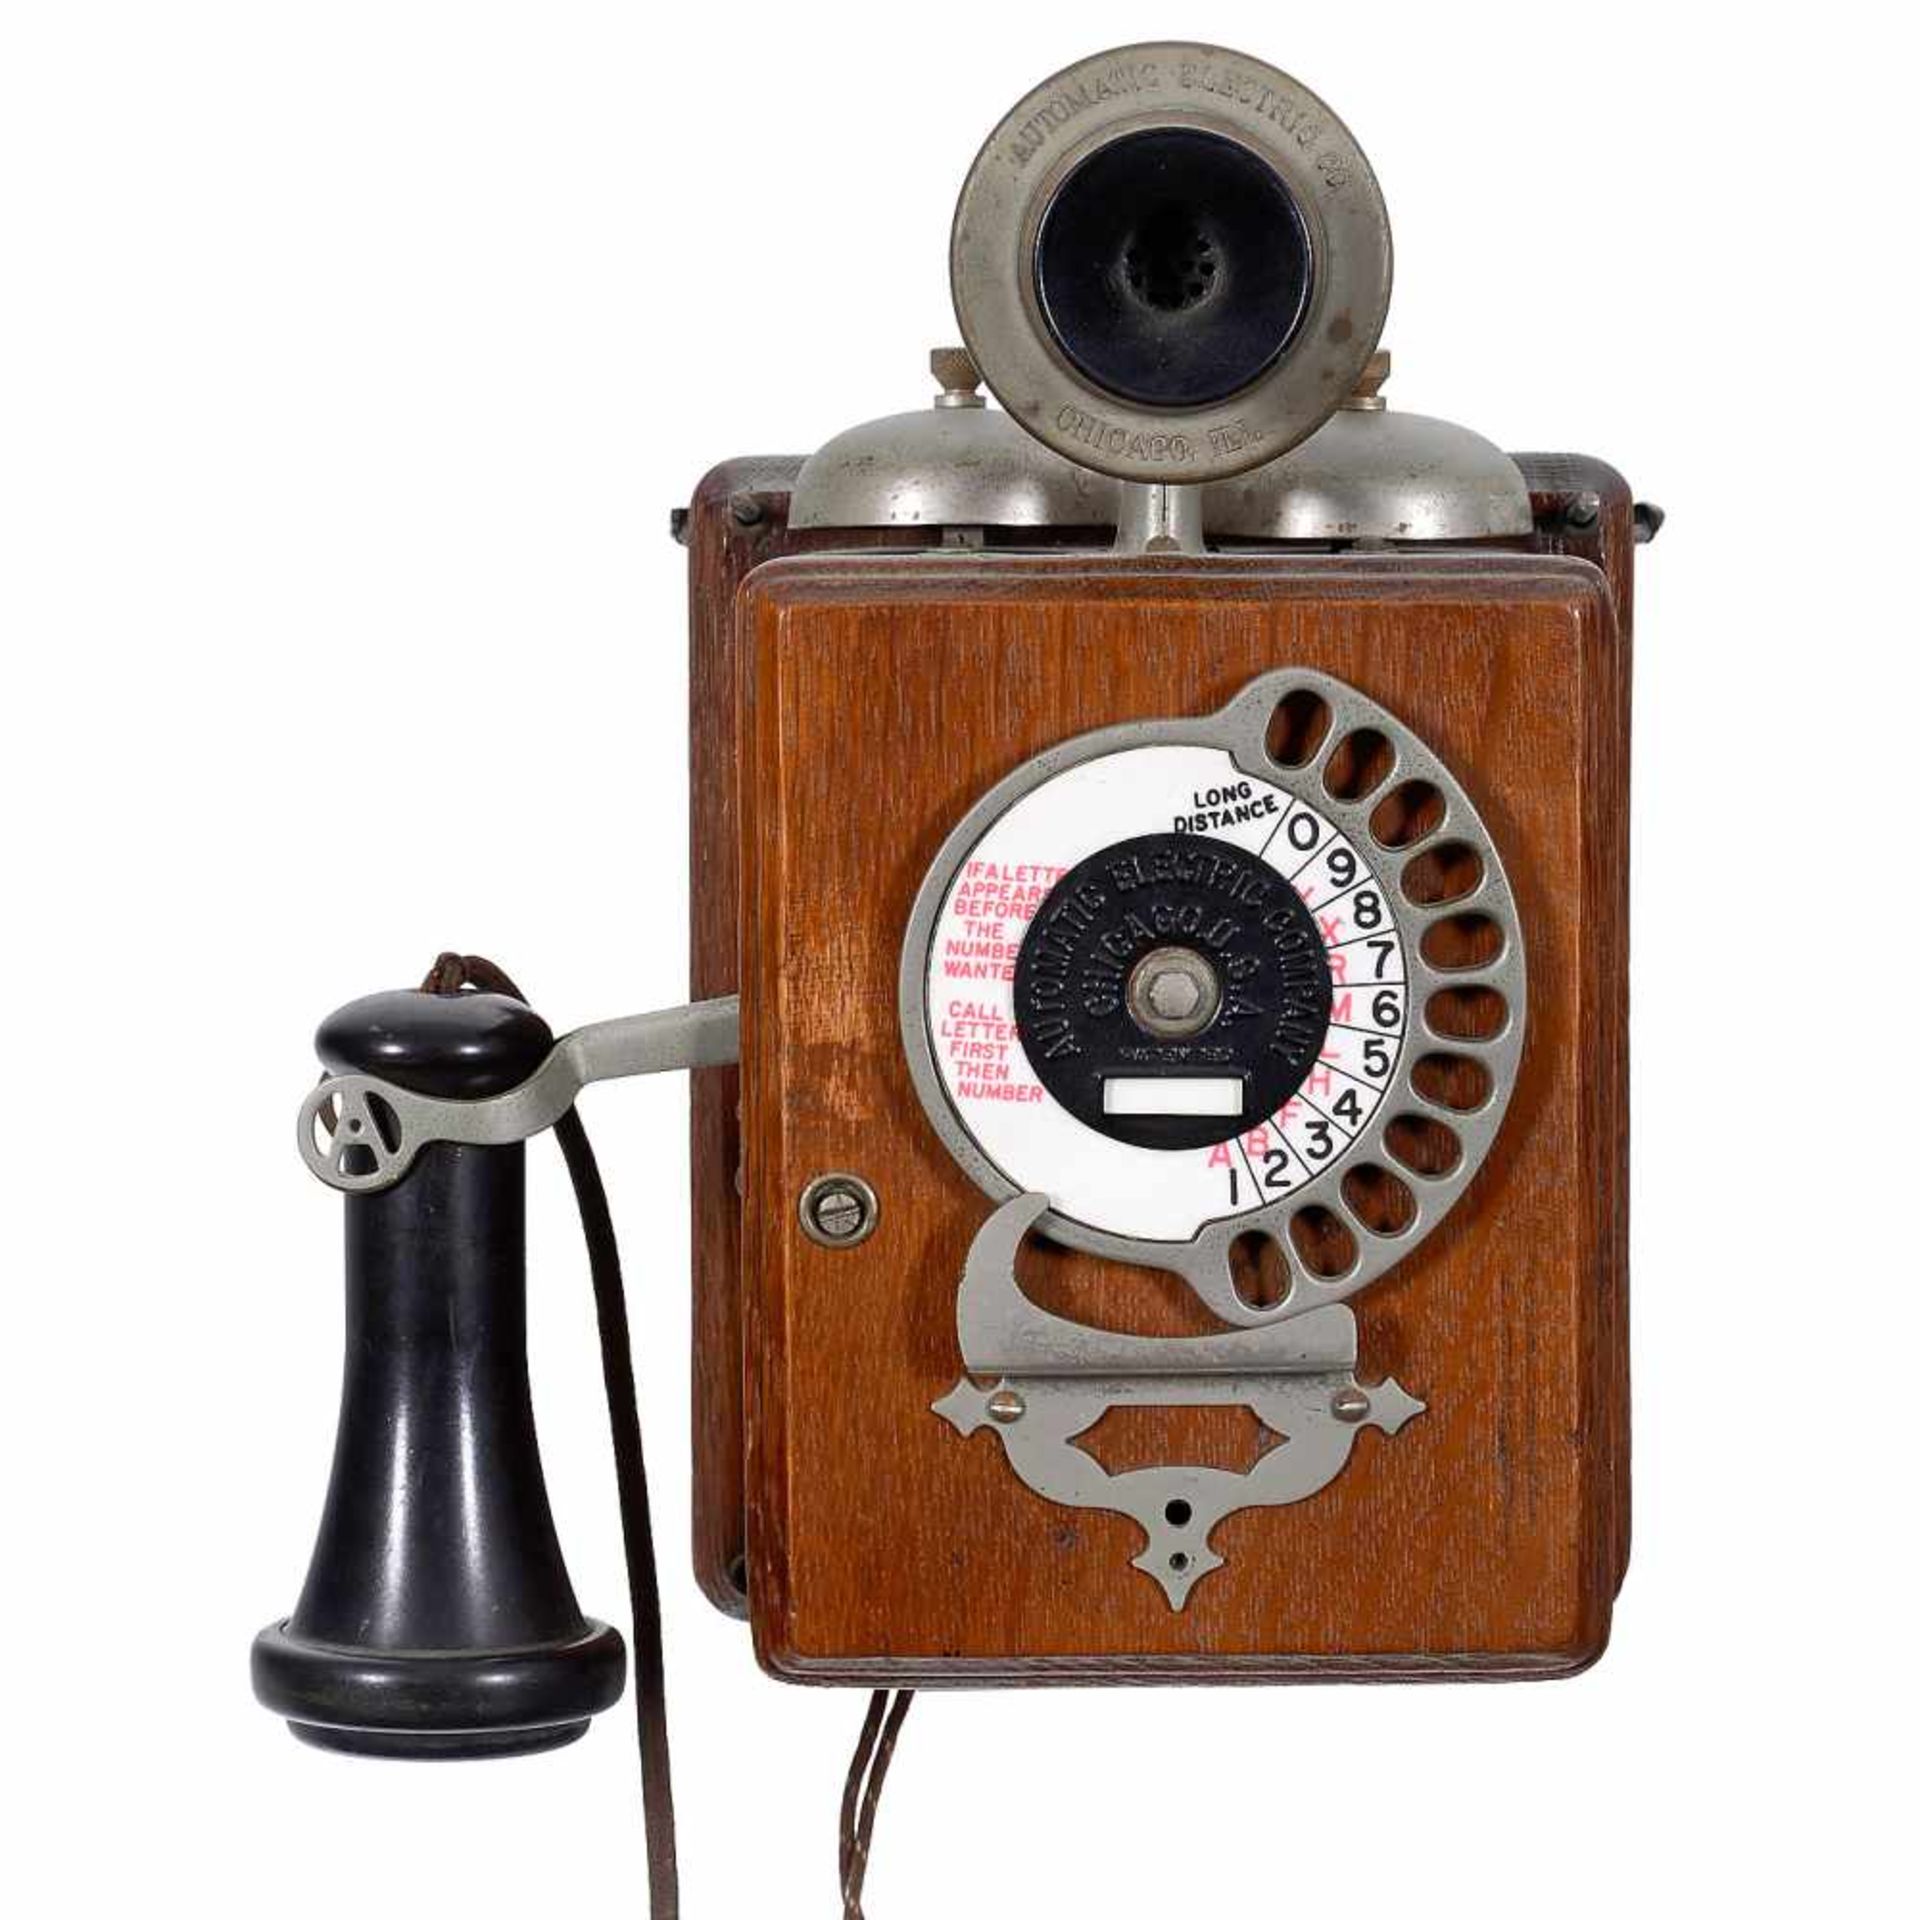 Antique American Dial Wall Phone, c. 1905Strowger Automatic Electric Company, Chicago. Unique